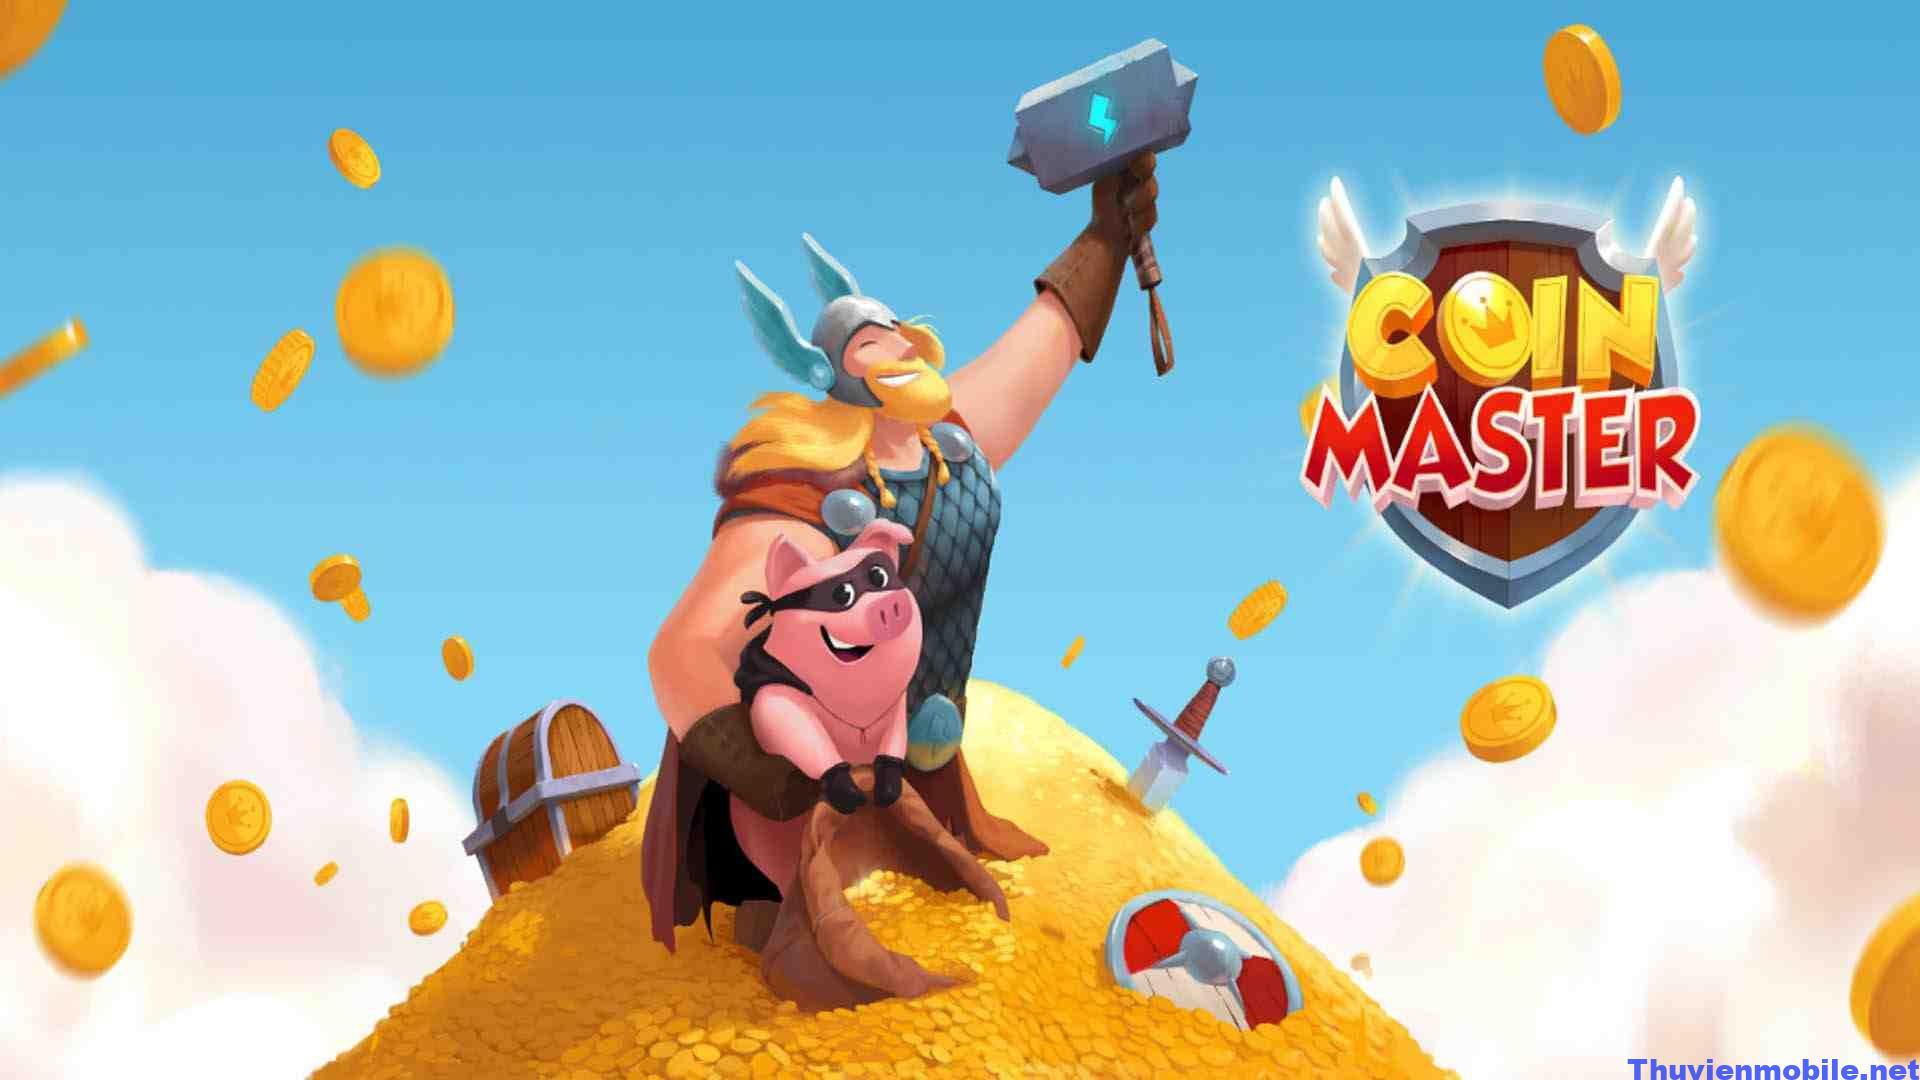 Hack Coin Master 1 Tải Hack Coin Master MOD APK (Vô hạn tiền, Spin) cho Android